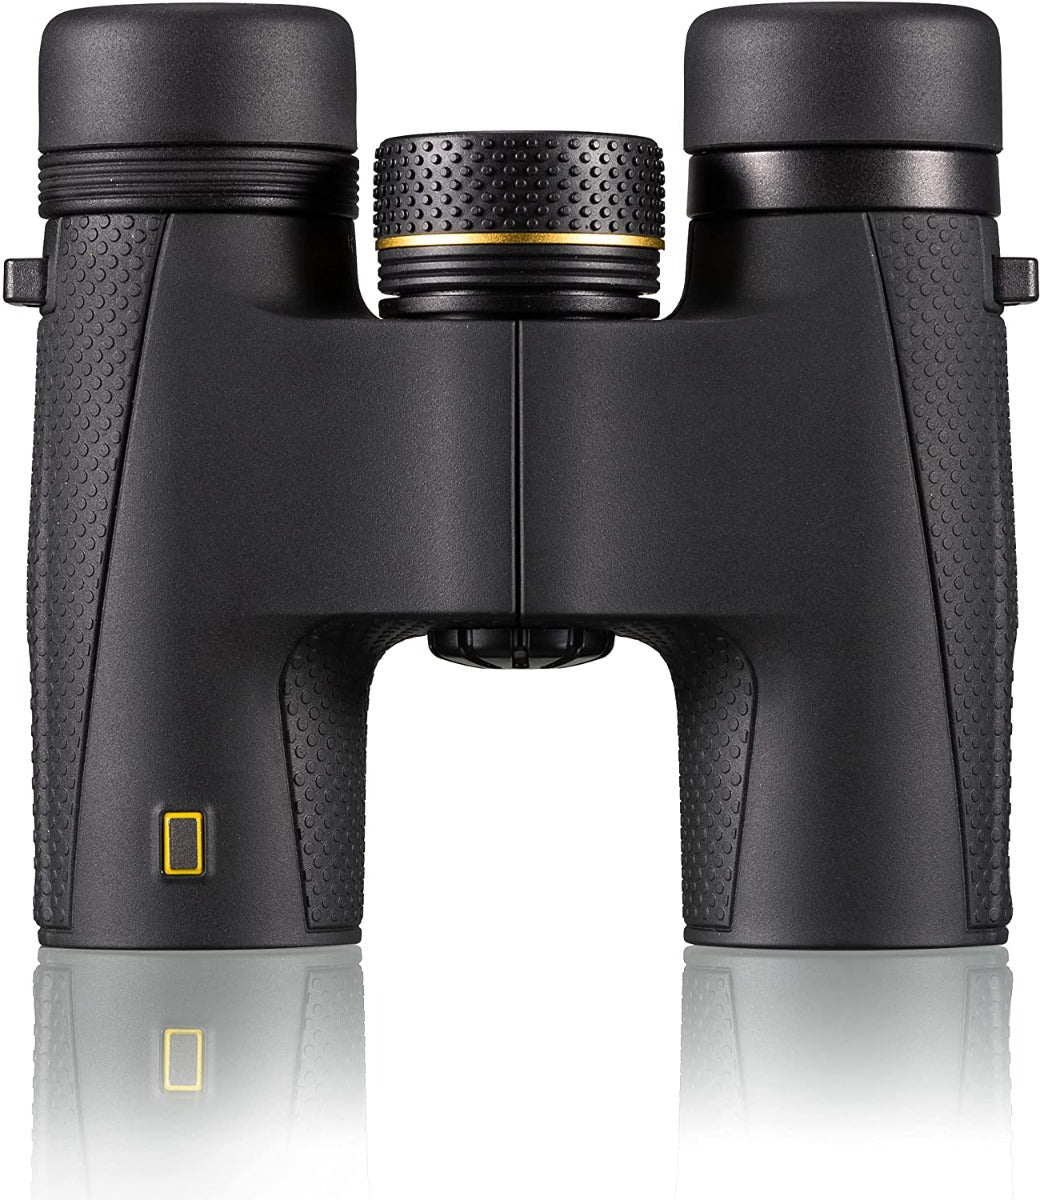 Product Image of National Geographic 10x25 Compact Binoculars